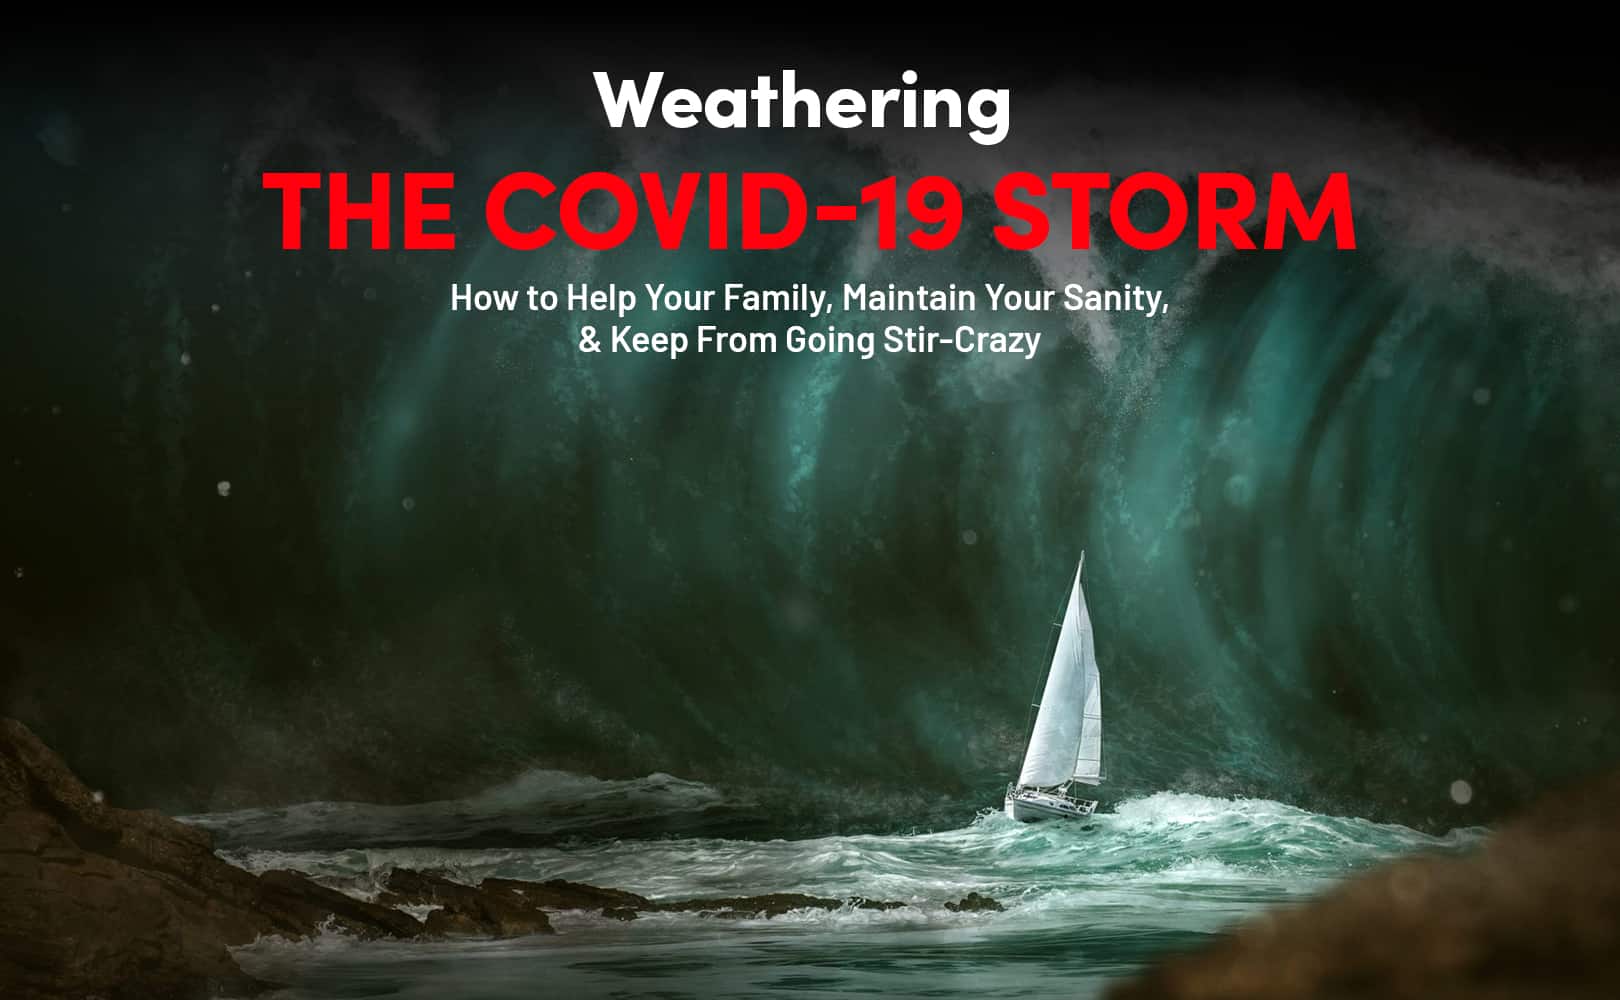 Weathering the COVID-19 Storm How to Help Your Family, Maintain Your Sanity, & Keep From Going Stir-Crazy